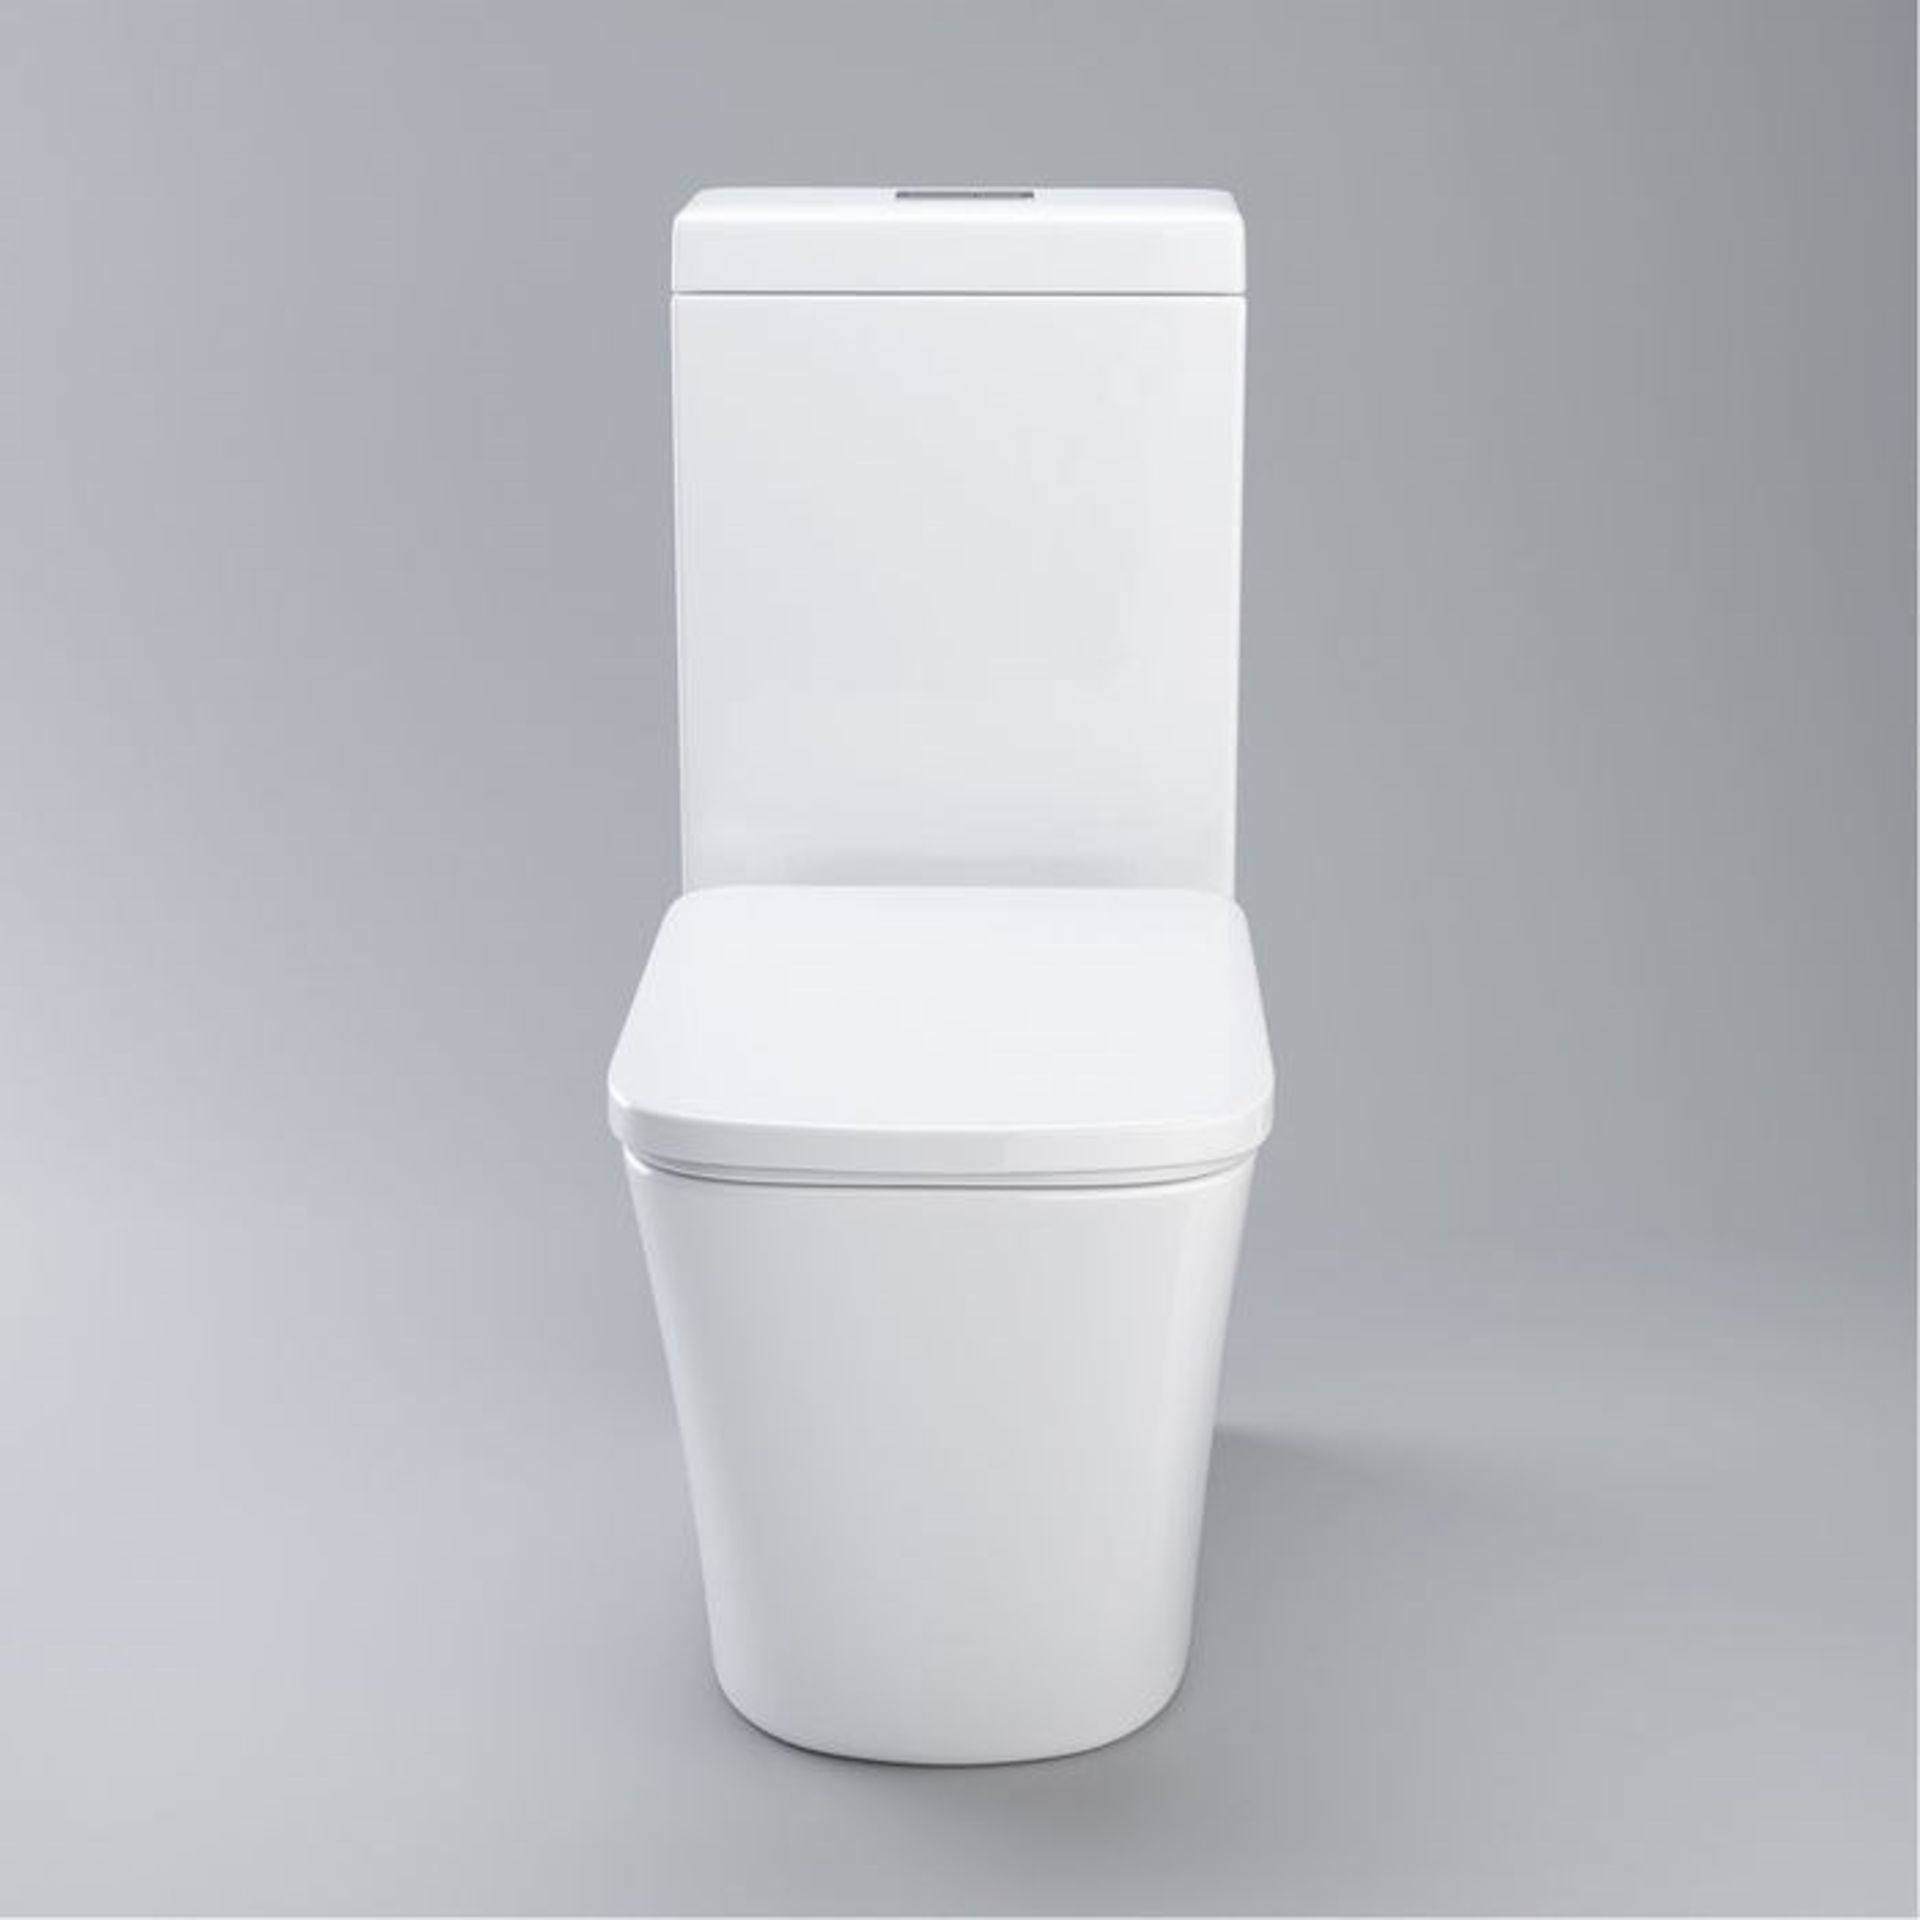 Florence Close Coupled Toilet & Cistern inc Soft Close Seat. Contemporary design finished in a... - Image 3 of 3